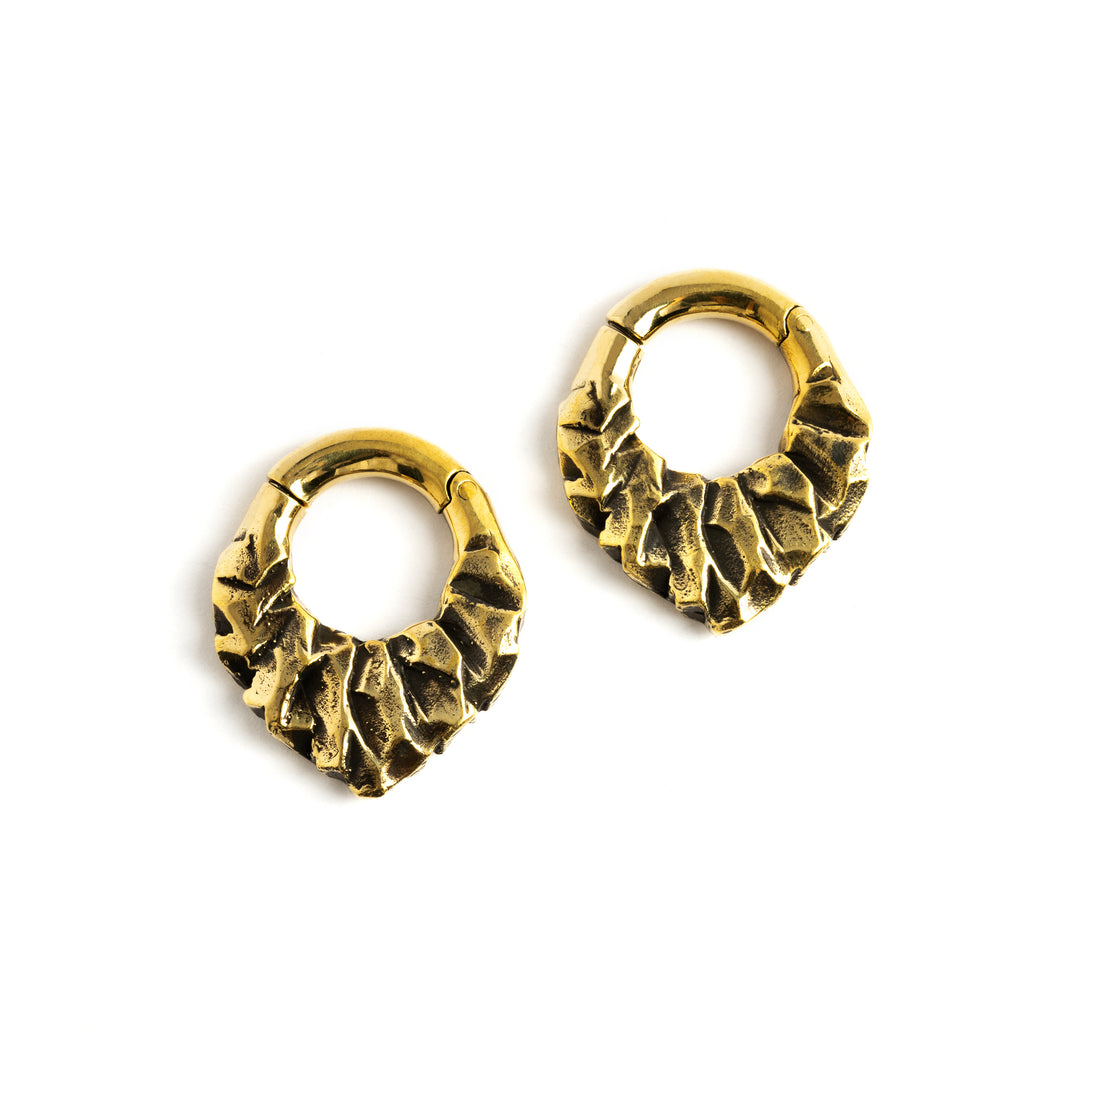 pair of gold brass teardrop shaped ear hoops hangers with rocky texture frontal view